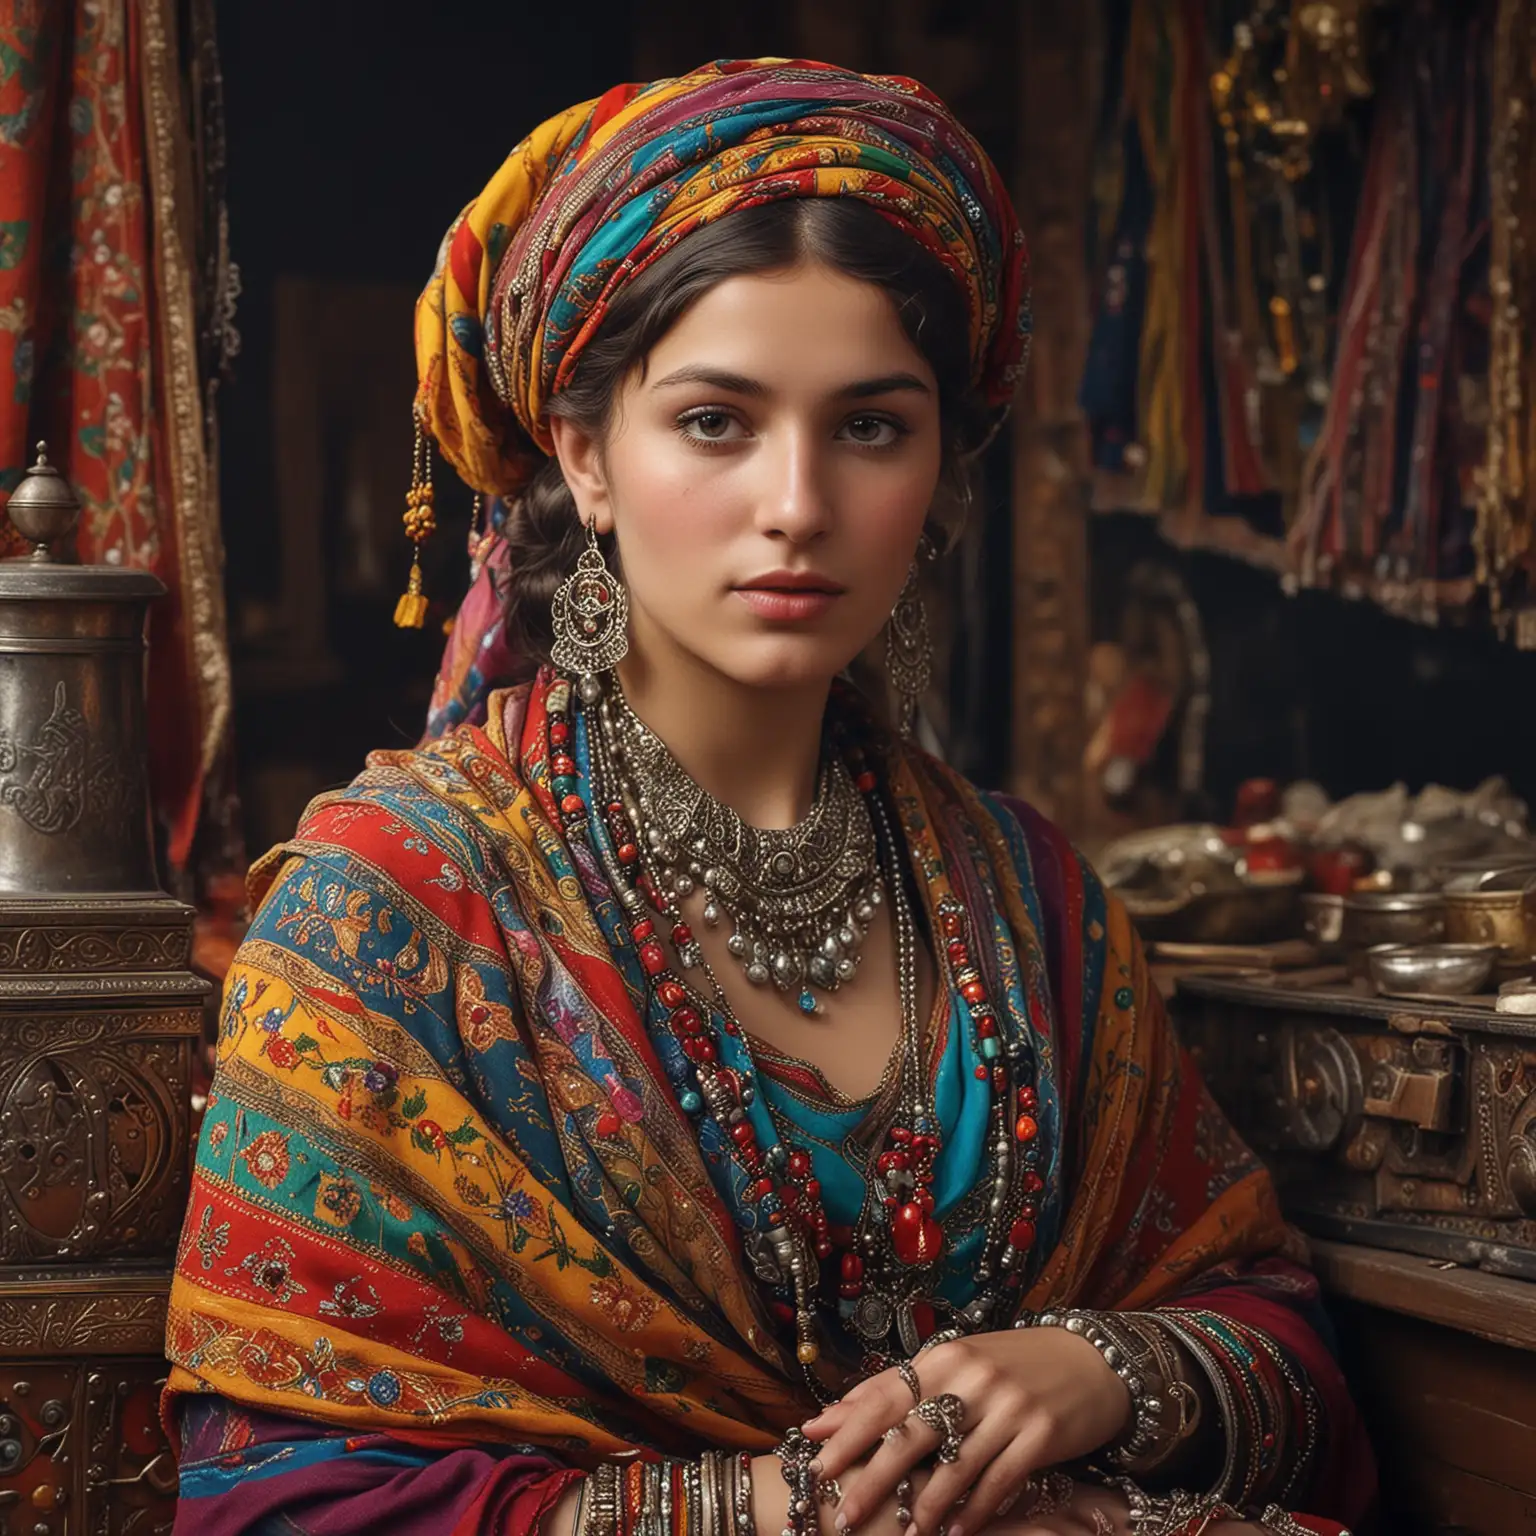 A realistic, beautiful photo of a pre-war gypsy woman, young and beautiful, shown from the waist up, dressed in a traditional, colorful outfit. On her head rests an ornate scarf, and the whole is complemented by numerous jewelry accessories. In the background is a traditional rolling stock cart, characteristic of the Roma culture. The stage exudes a wealth of culture and heritage, taking us back in time to days full of colour and tradition.